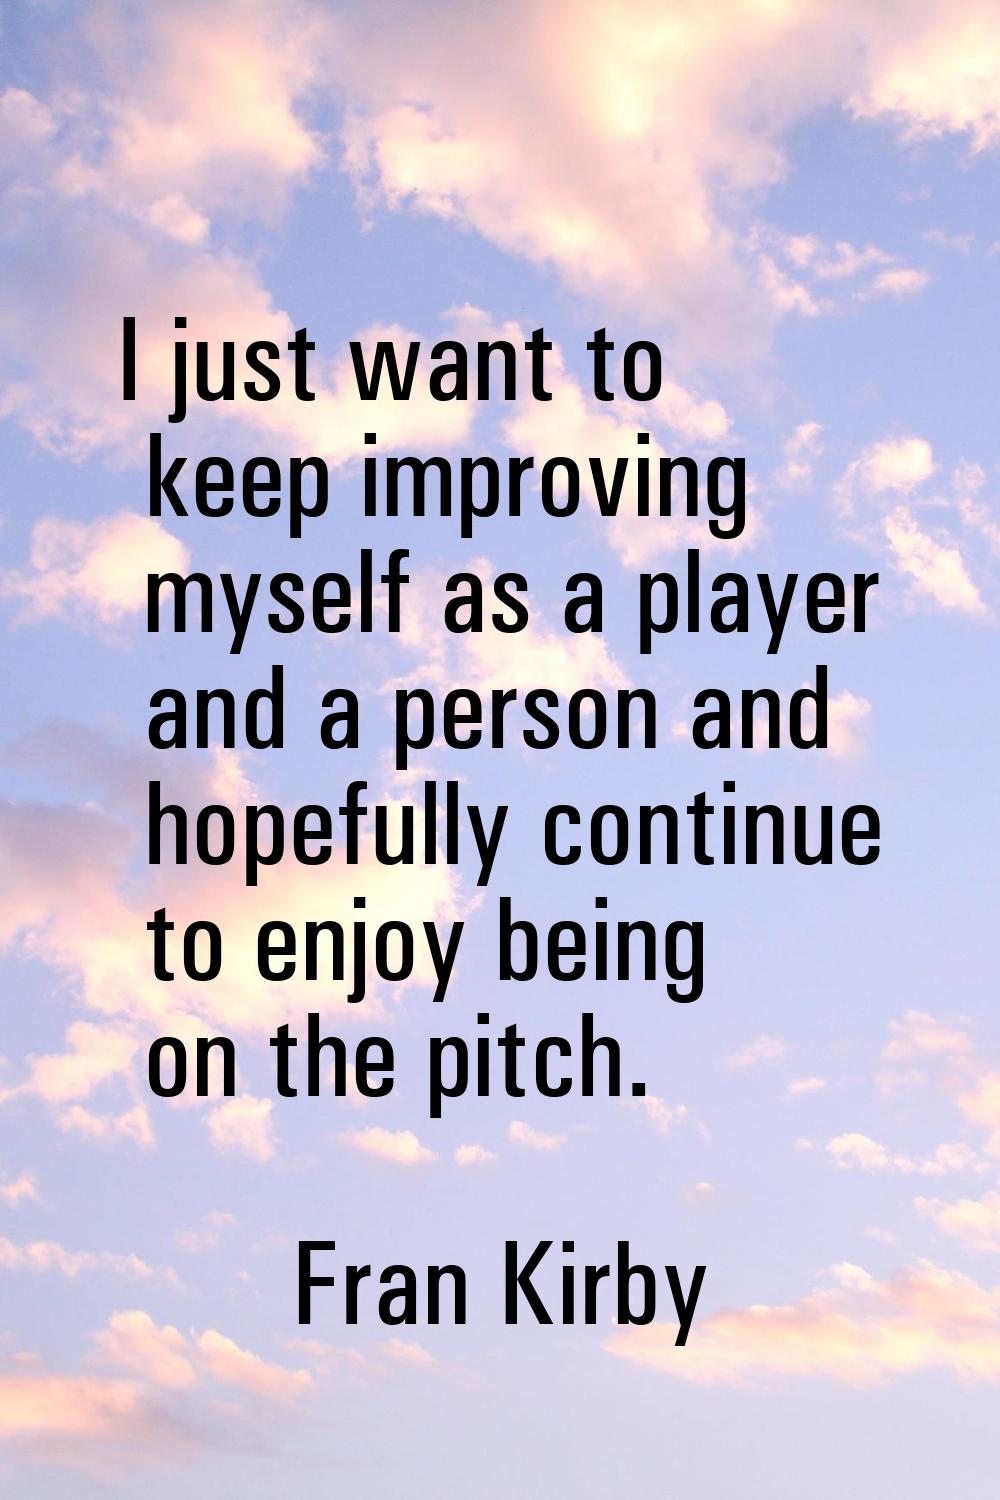 I just want to keep improving myself as a player and a person and hopefully continue to enjoy being